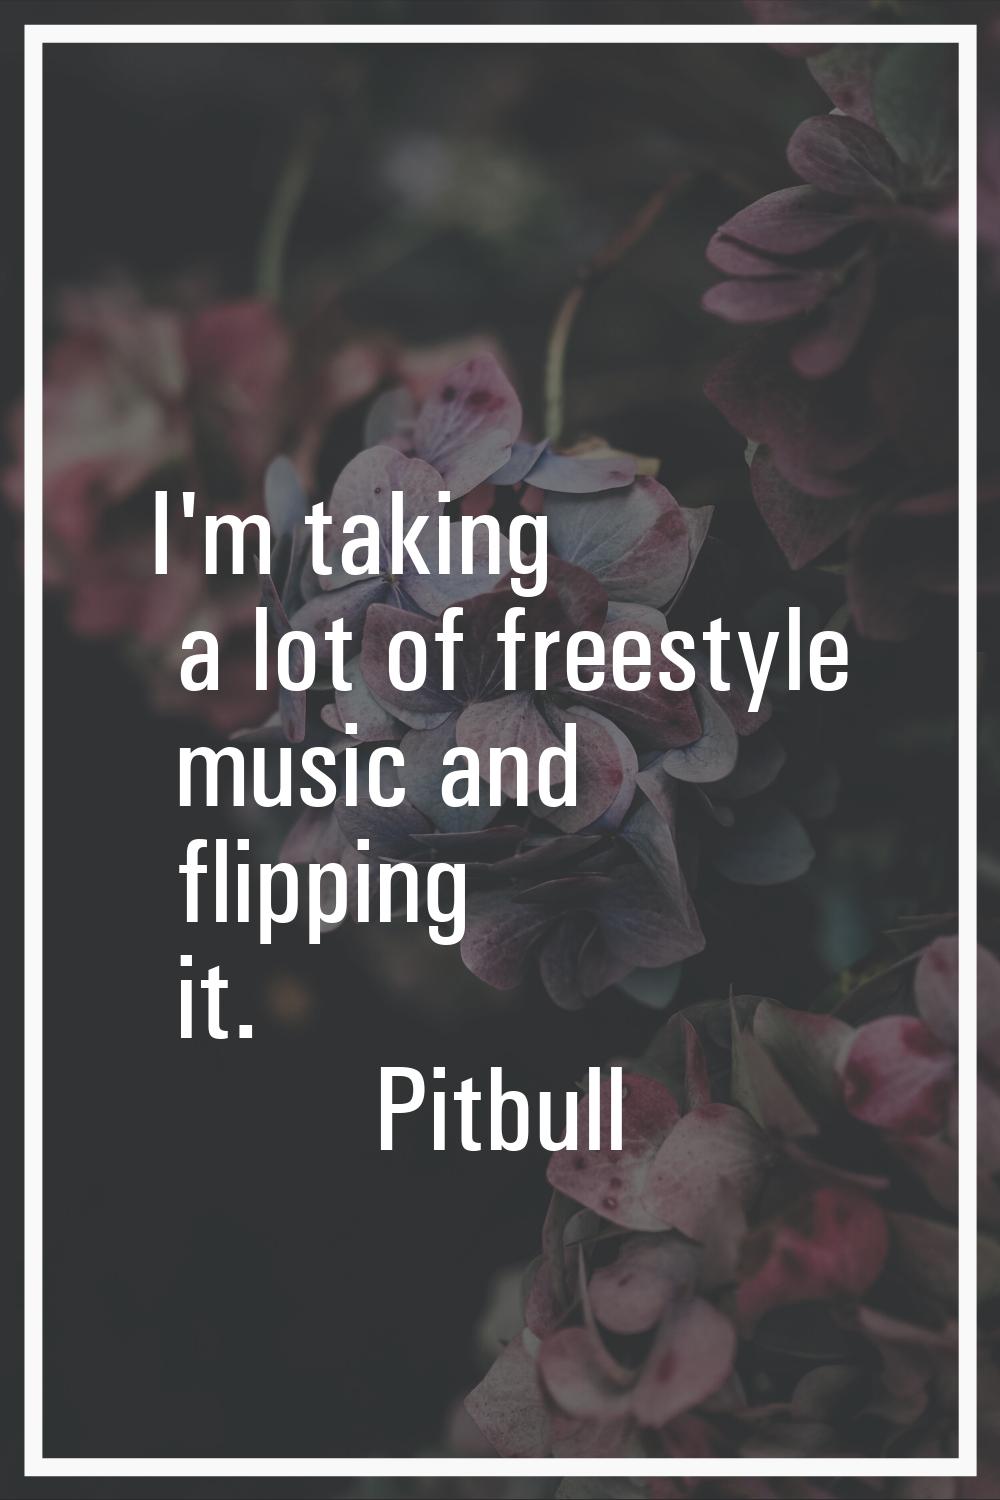 I'm taking a lot of freestyle music and flipping it.